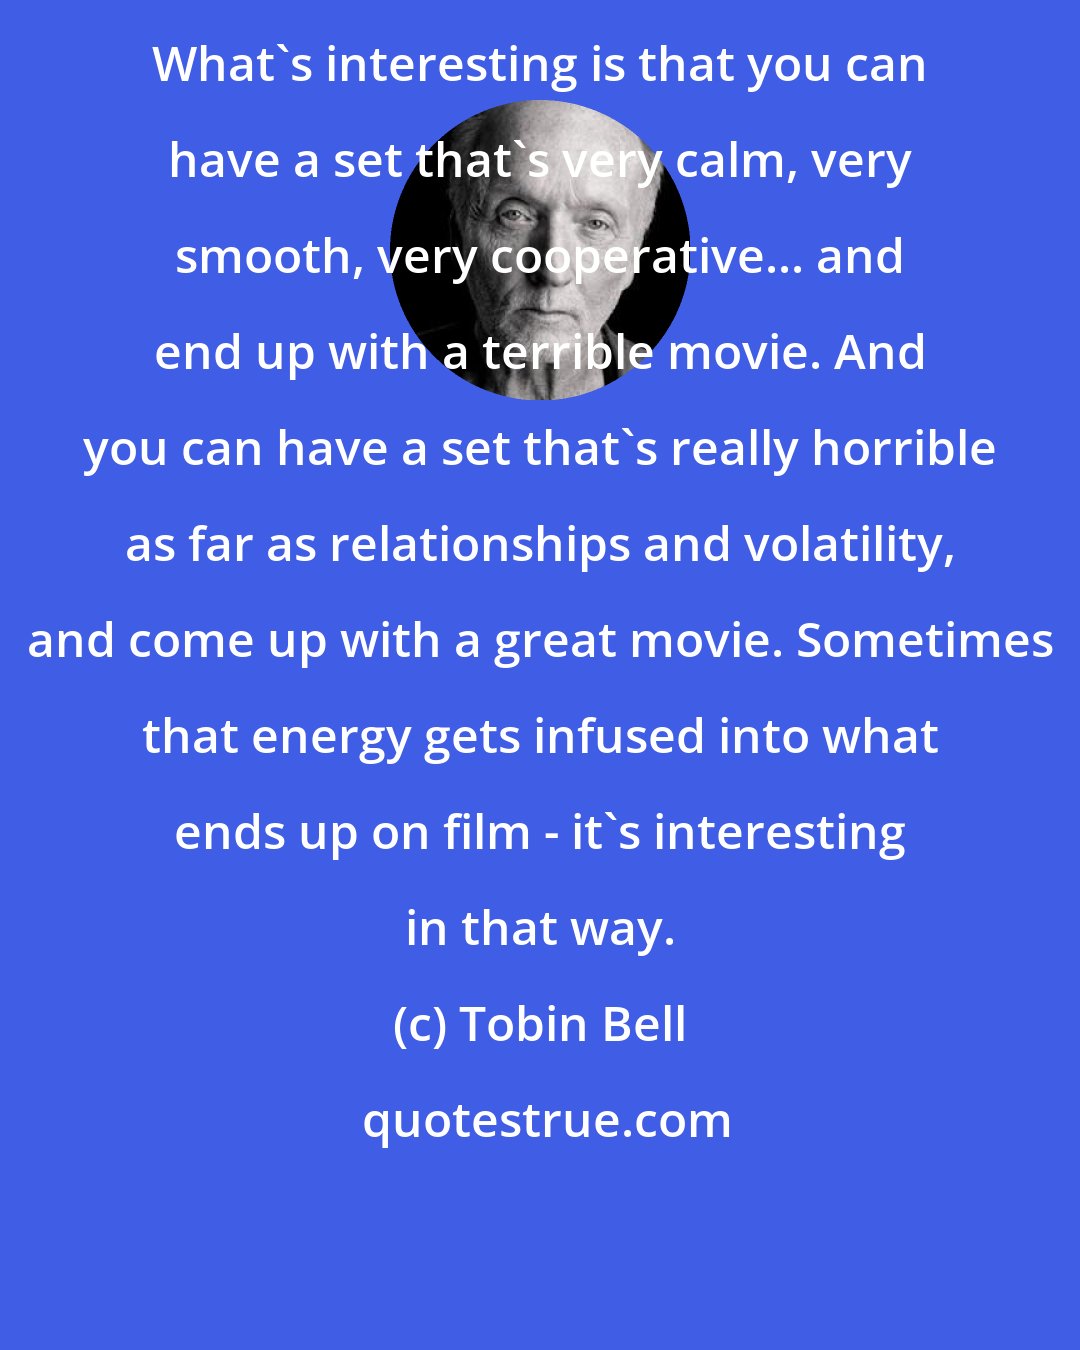 Tobin Bell: What's interesting is that you can have a set that's very calm, very smooth, very cooperative... and end up with a terrible movie. And you can have a set that's really horrible as far as relationships and volatility, and come up with a great movie. Sometimes that energy gets infused into what ends up on film - it's interesting in that way.